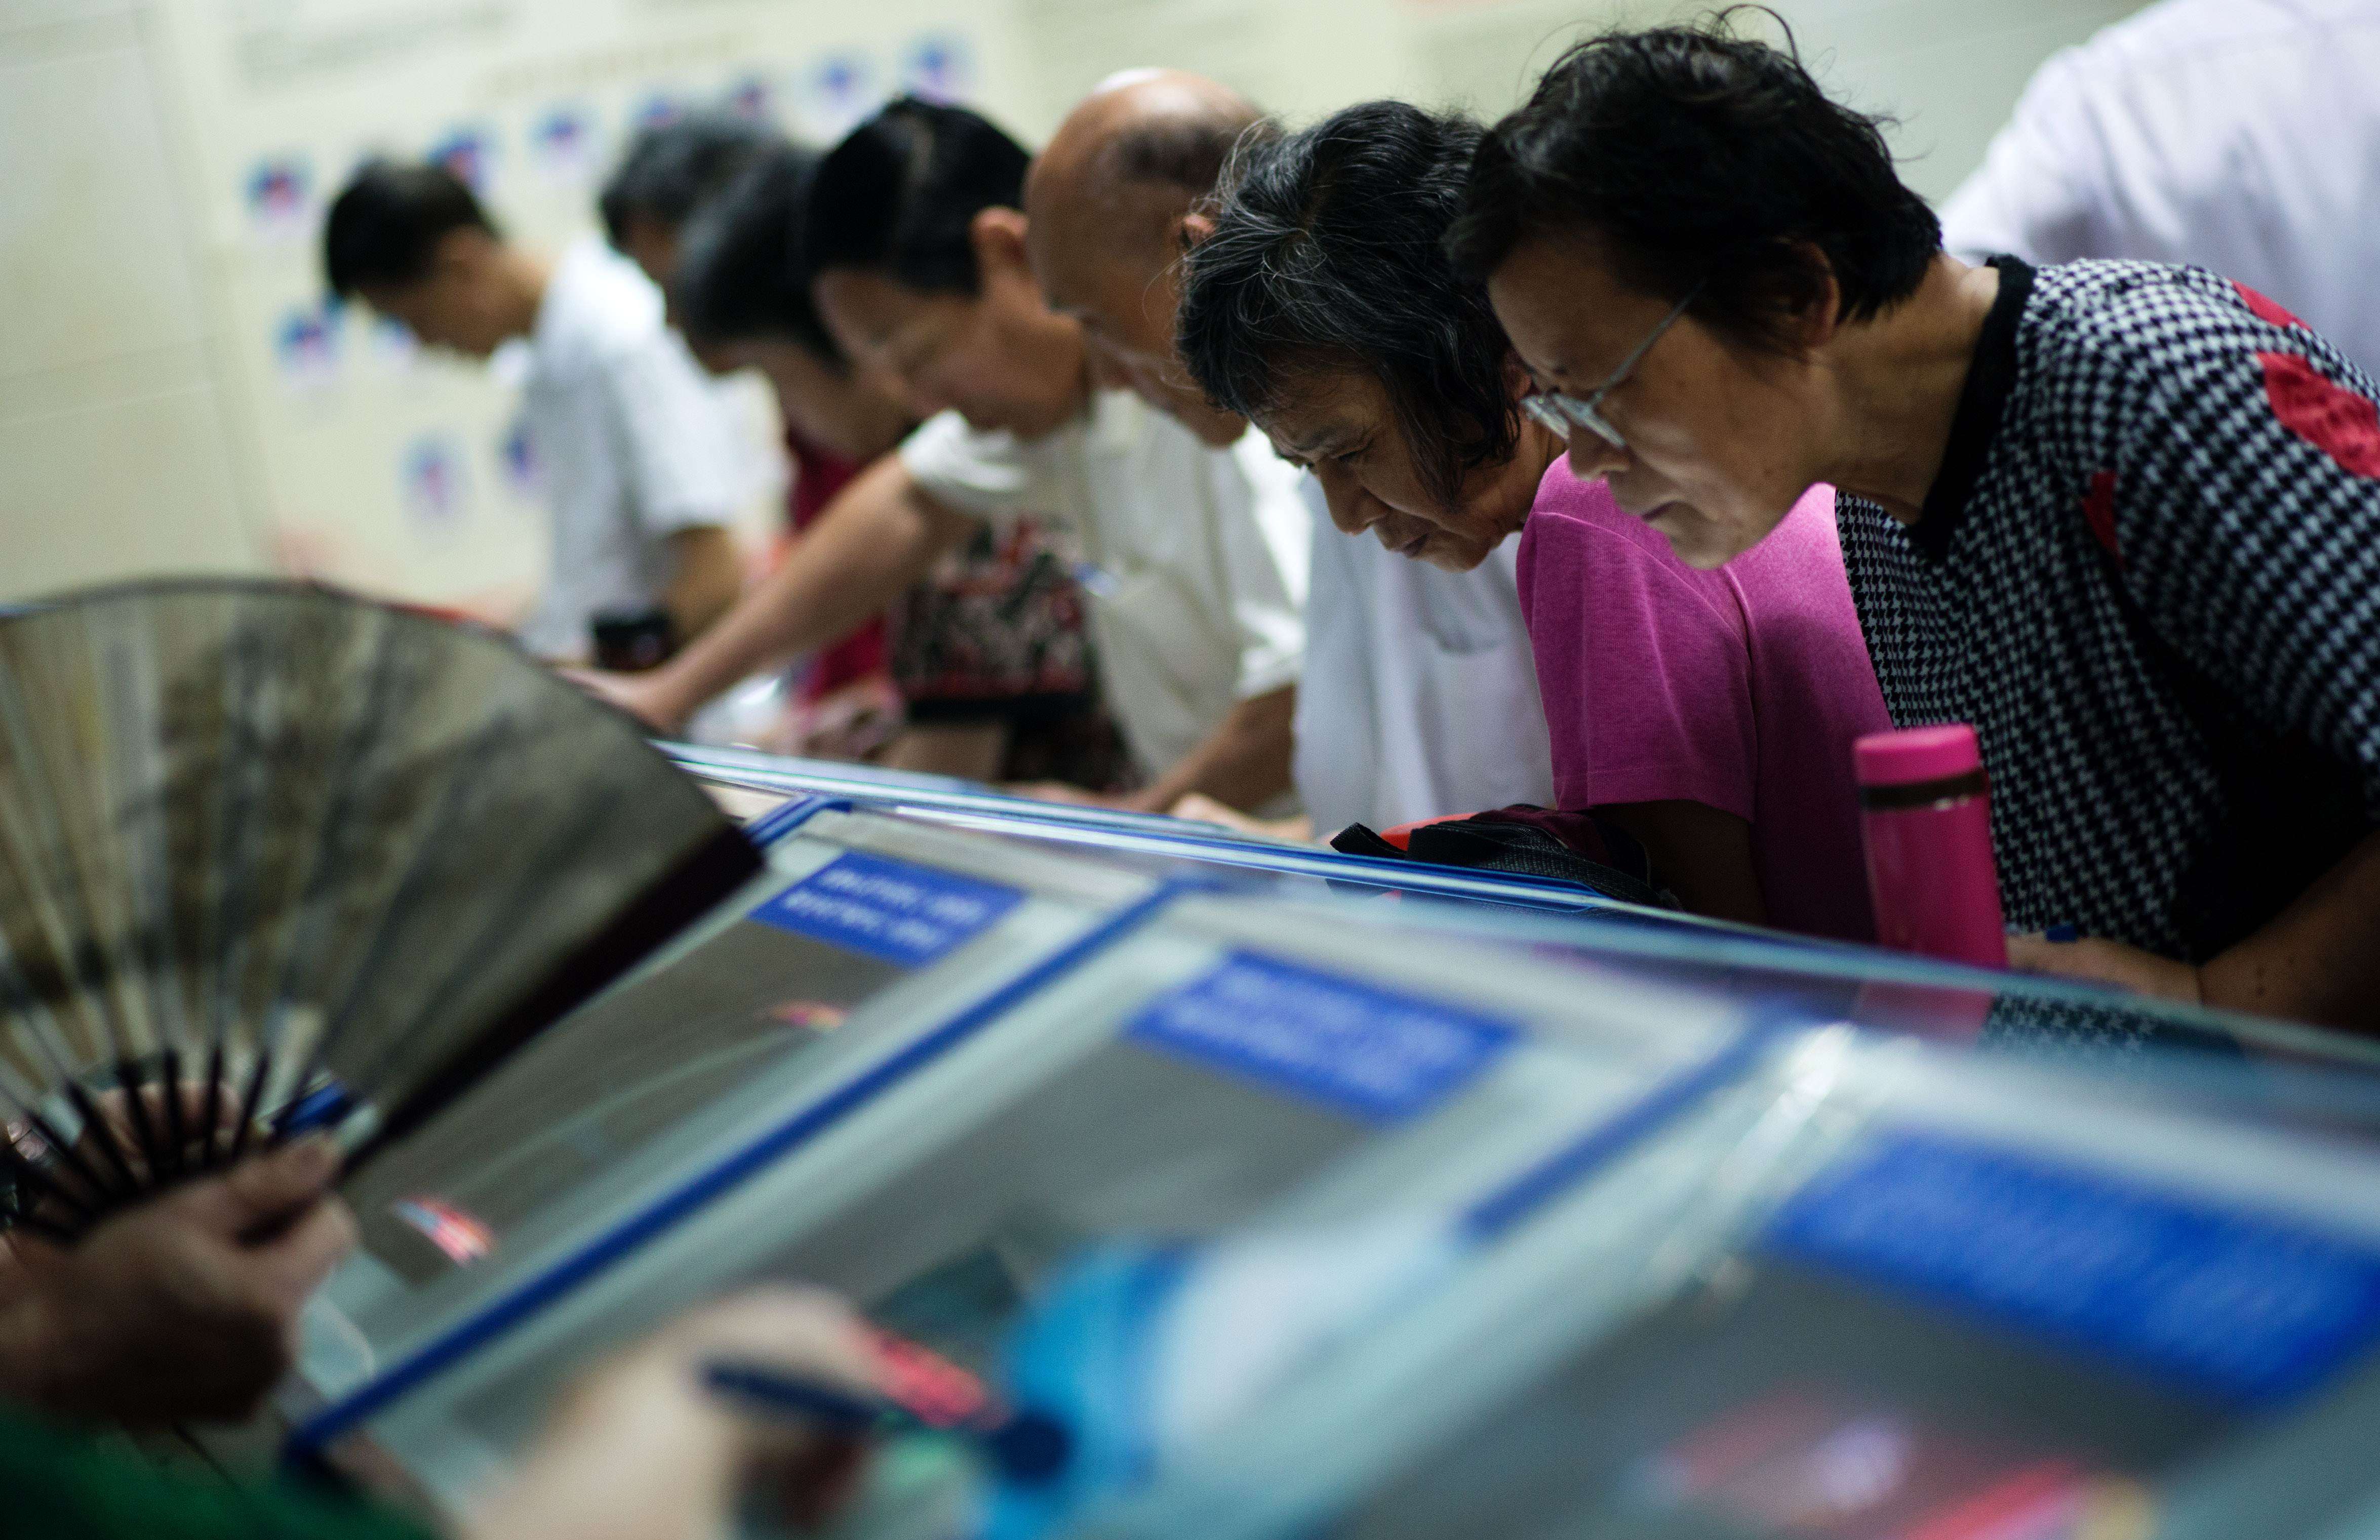 Investors look at stock prices at a securities exchange in Shanghai. Photo: AFP